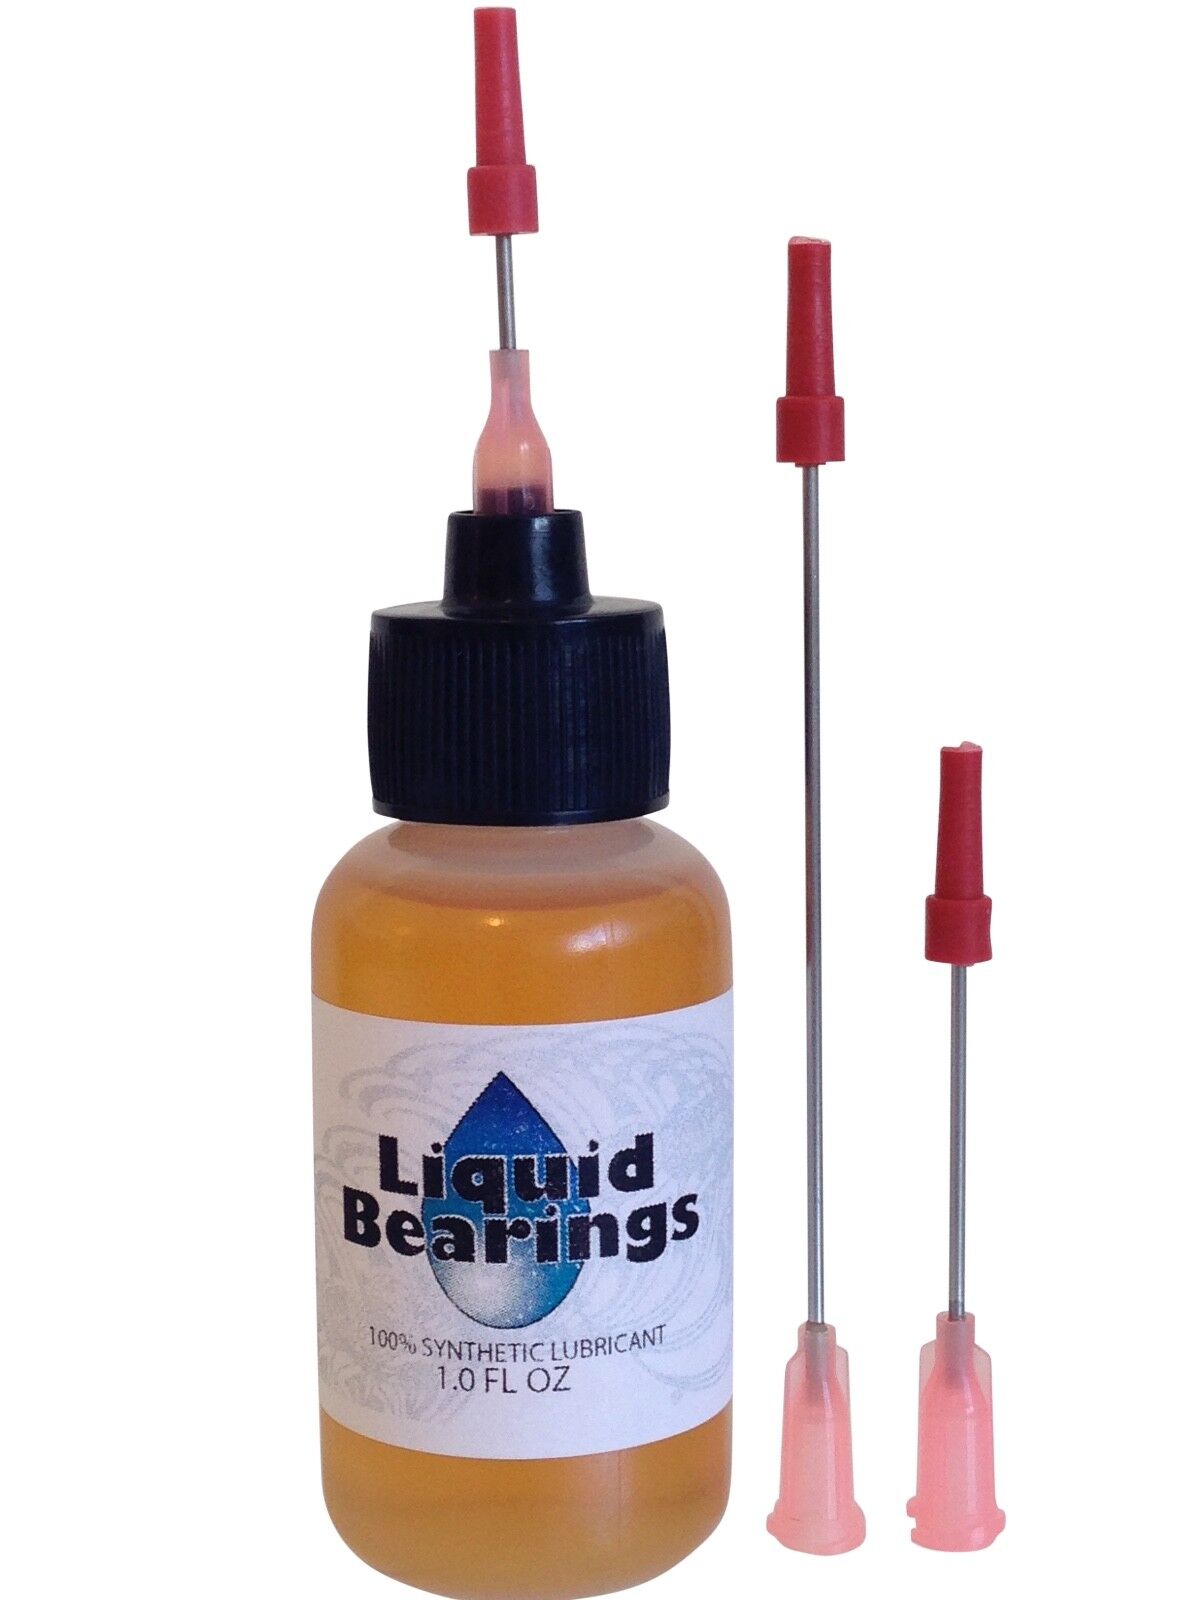 Liquid Bearings, w/XL needle, BEST 100%-synthetic oil for antique cuckoo clocks